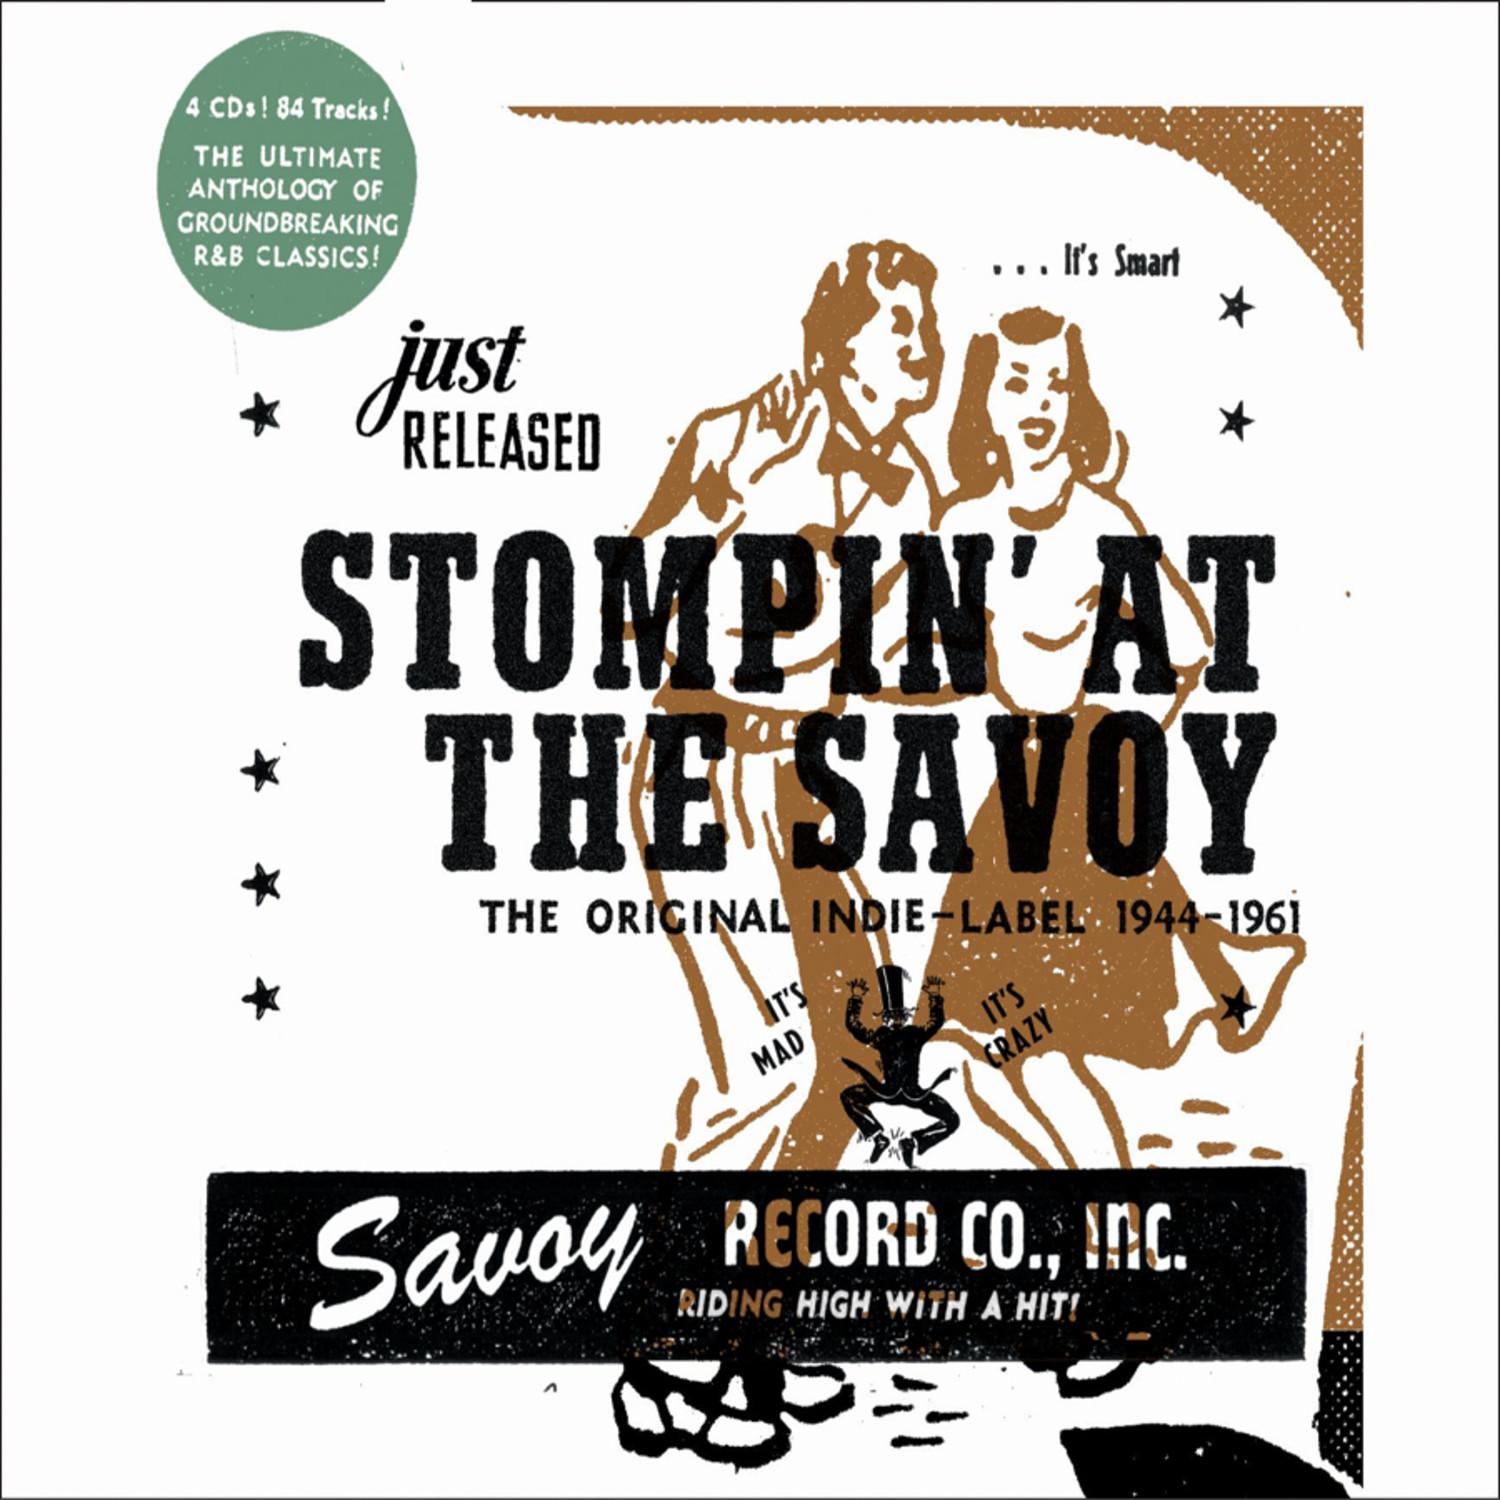 Stompin' at the Savoy: The Original Indie Label, 1944 - 1961